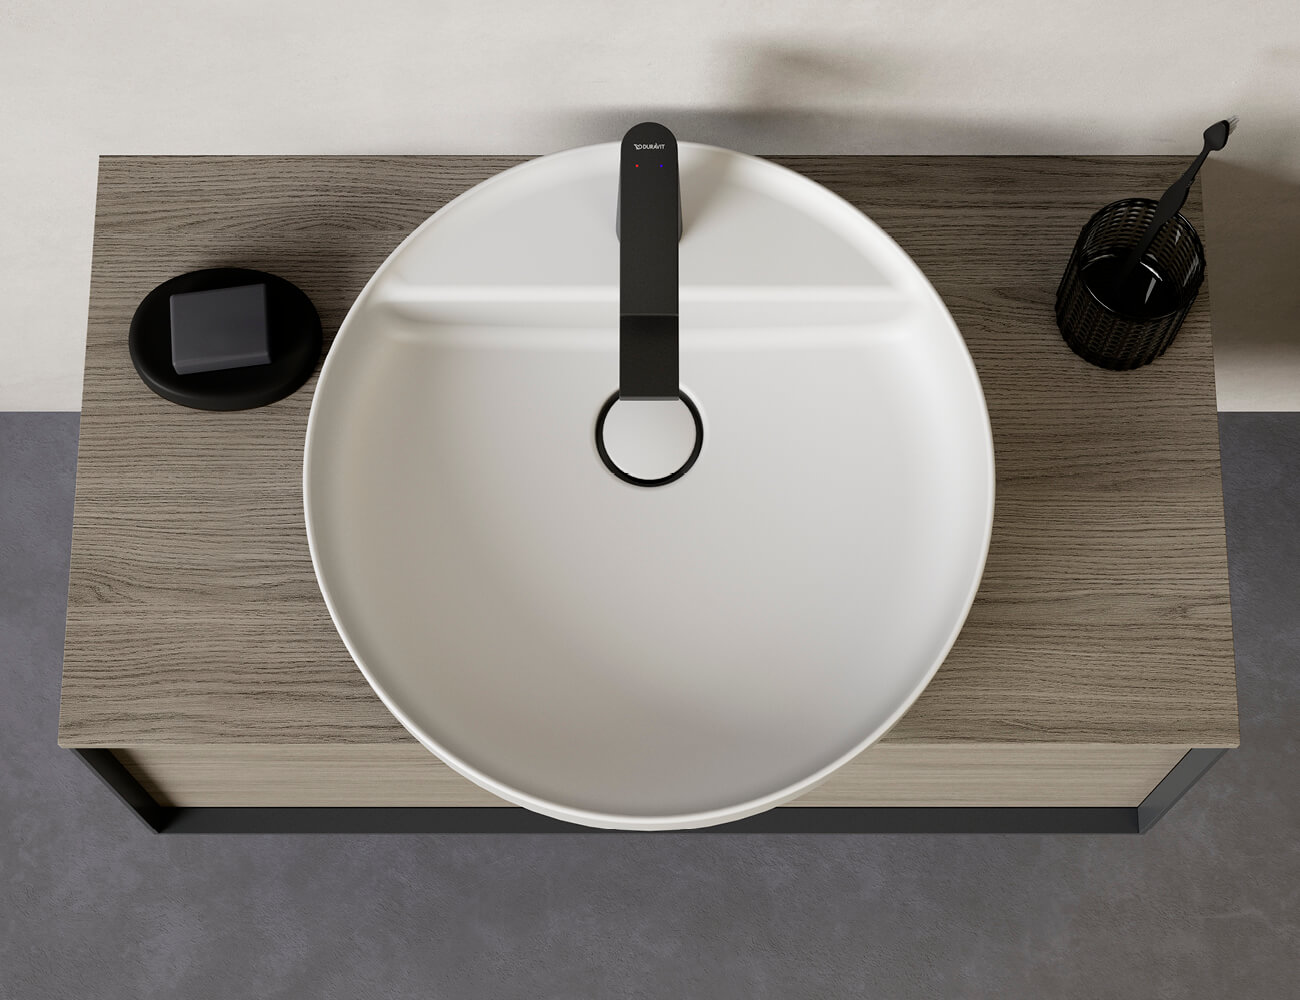 Straight console vanity units combined with round washbowl
